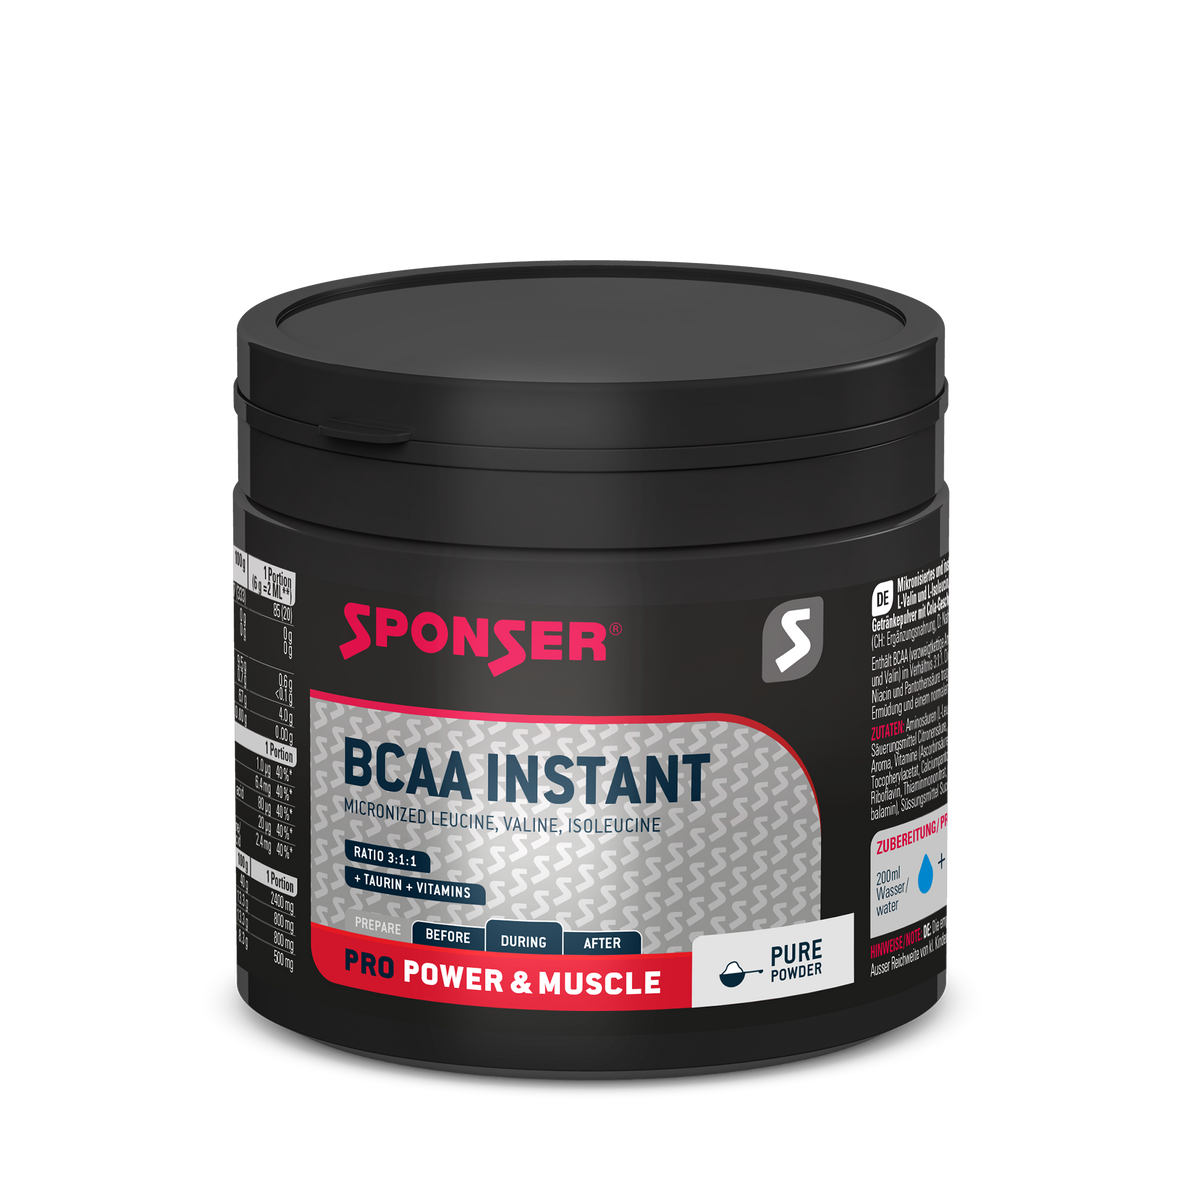 BCAA INSTANT | NEUTRAL